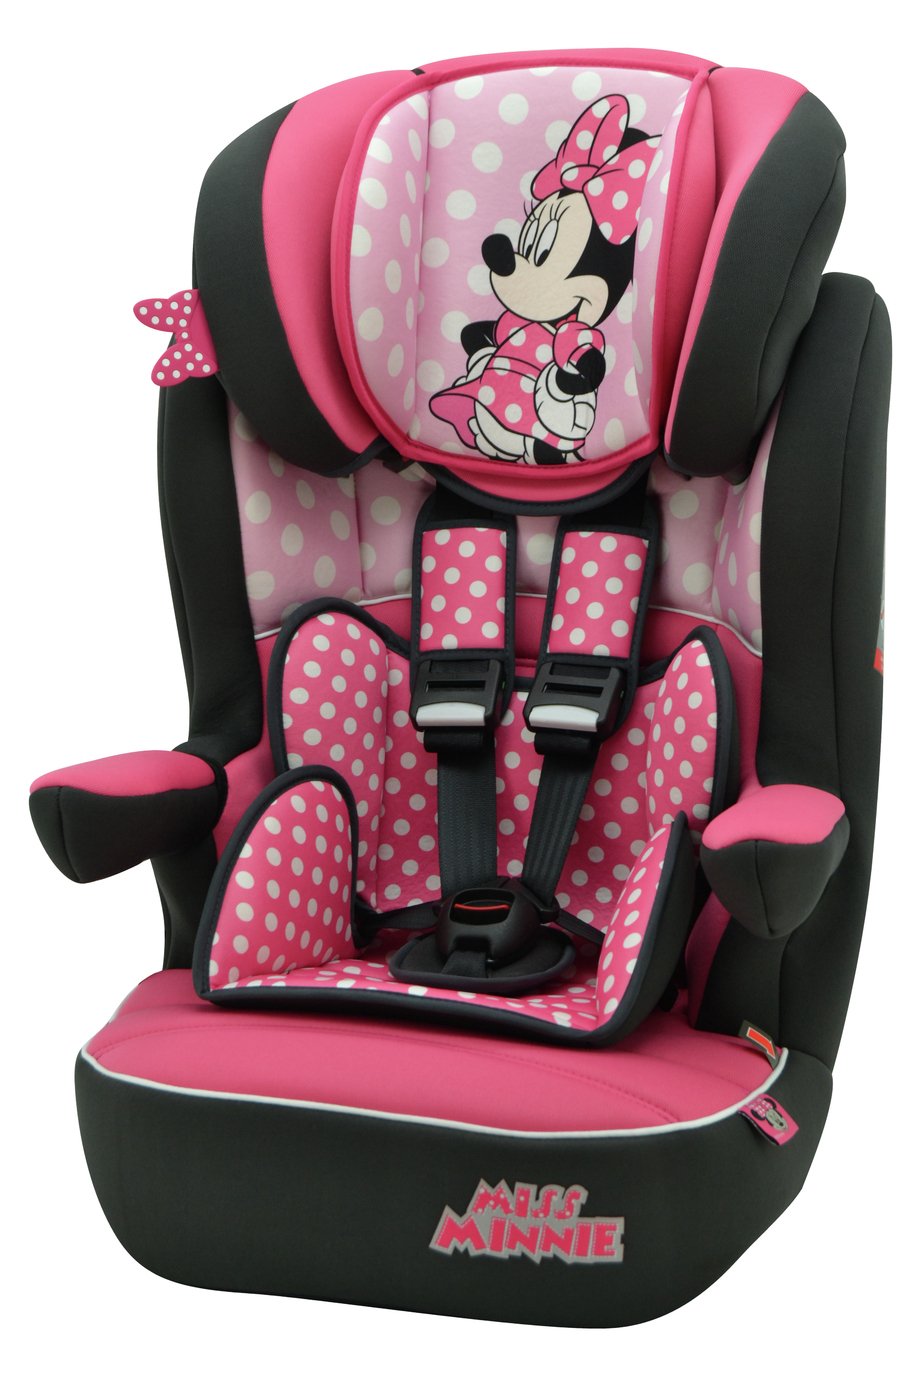 Disney Minnie Mouse IMAX SP Group 1/2/3 Car Seat - Pink